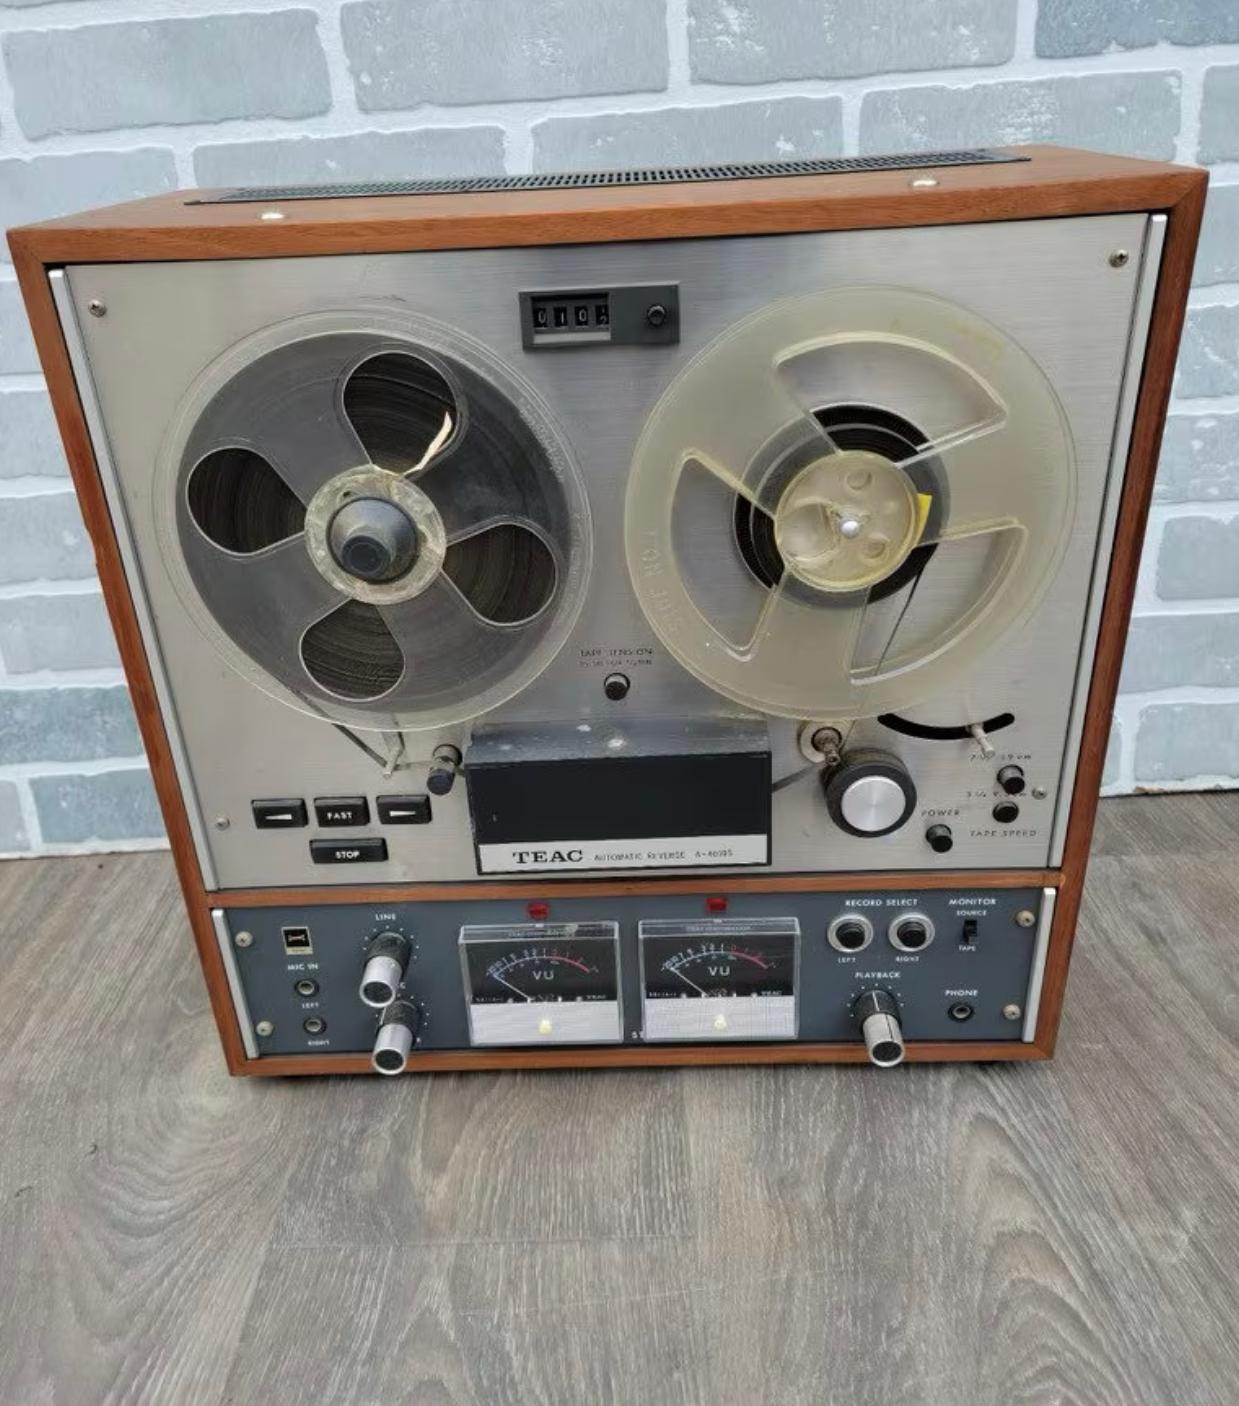 Vintage 1966 TEAC Tascam Reel To Reel Tape Recorder

This Antique Tape Recorded is from the 1960’s. It was advertised as “record in the home and not just the music tapes, and enjoy the FM broadcast a better sound to sound gradually became the boom,